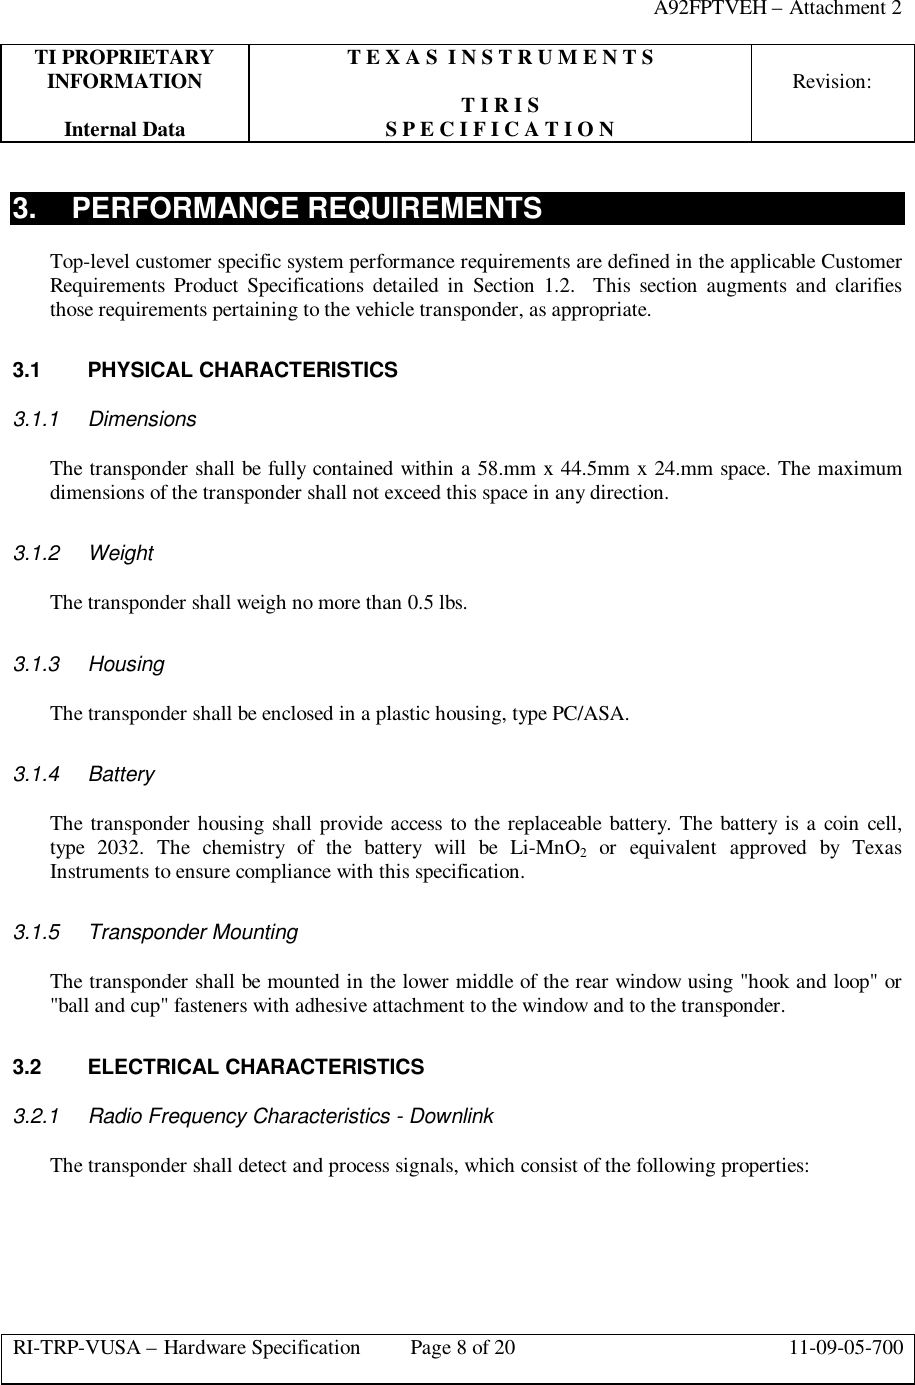 A92FPTVEH – Attachment 2TI PROPRIETARY T E X A S  I N S T R U M E N T SINFORMATION Revision:T I R I SInternal Data S P E C I F I C A T I O NRI-TRP-VUSA – Hardware Specification Page 8 of 20 11-09-05-7003. PERFORMANCE REQUIREMENTSTop-level customer specific system performance requirements are defined in the applicable CustomerRequirements Product Specifications detailed in Section 1.2.  This section augments and clarifiesthose requirements pertaining to the vehicle transponder, as appropriate.3.1 PHYSICAL CHARACTERISTICS3.1.1 DimensionsThe transponder shall be fully contained within a 58.mm x 44.5mm x 24.mm space. The maximumdimensions of the transponder shall not exceed this space in any direction.3.1.2 WeightThe transponder shall weigh no more than 0.5 lbs.3.1.3 HousingThe transponder shall be enclosed in a plastic housing, type PC/ASA.3.1.4 BatteryThe transponder housing shall provide access to the replaceable battery. The battery is a coin cell,type 2032. The chemistry of the battery will be Li-MnO2 or equivalent approved by TexasInstruments to ensure compliance with this specification.3.1.5 Transponder MountingThe transponder shall be mounted in the lower middle of the rear window using &quot;hook and loop&quot; or&quot;ball and cup&quot; fasteners with adhesive attachment to the window and to the transponder.3.2 ELECTRICAL CHARACTERISTICS3.2.1 Radio Frequency Characteristics - DownlinkThe transponder shall detect and process signals, which consist of the following properties: